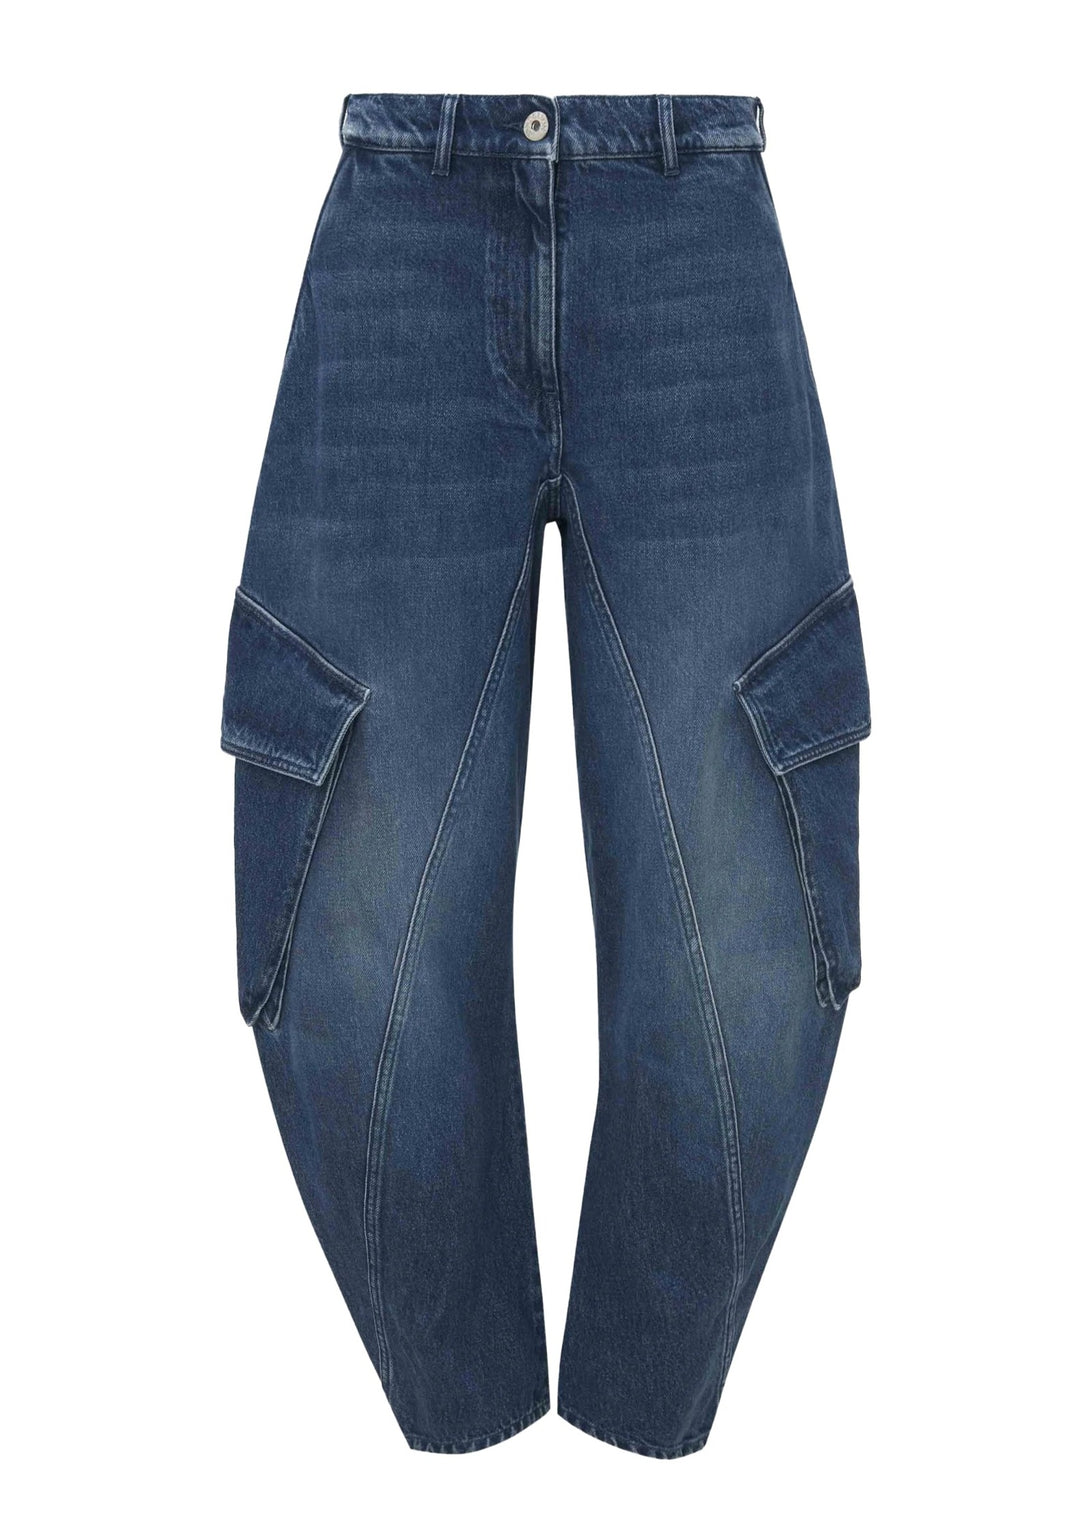 Twisted cargo jeans